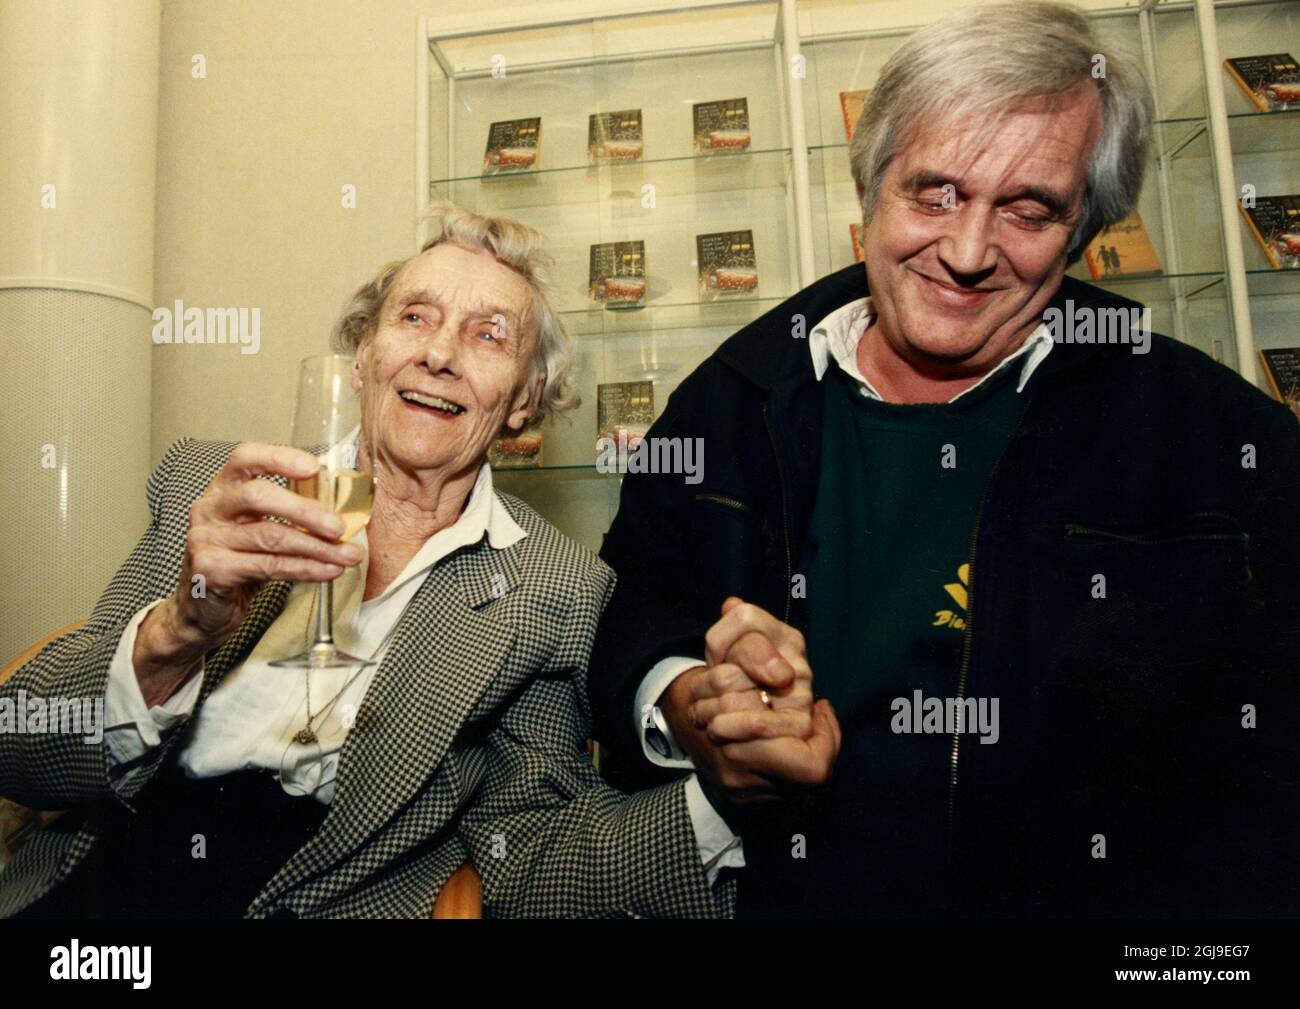 STOCKHOLM 1996-11-20. Fike Swedis writer Henning Mankell together with Astrid Lindgren when Mankell received the Astrid Lindgren award in Stockholm, Sweden November 20, 1996. mankell died Monday Henning Mankell was a Swedish crime writer, political activist and dramatist, best known for a series of crime novels starring his most famous creation, Inspector Kurt Wallander. Wallander has been filmed both with Swedish actor Krister Henriksson and British actor Kenneth Branagh in the leading roles. Mankell was 67. Foto: Gunnar Seijbold / TT / Kod: 1024  Stock Photo